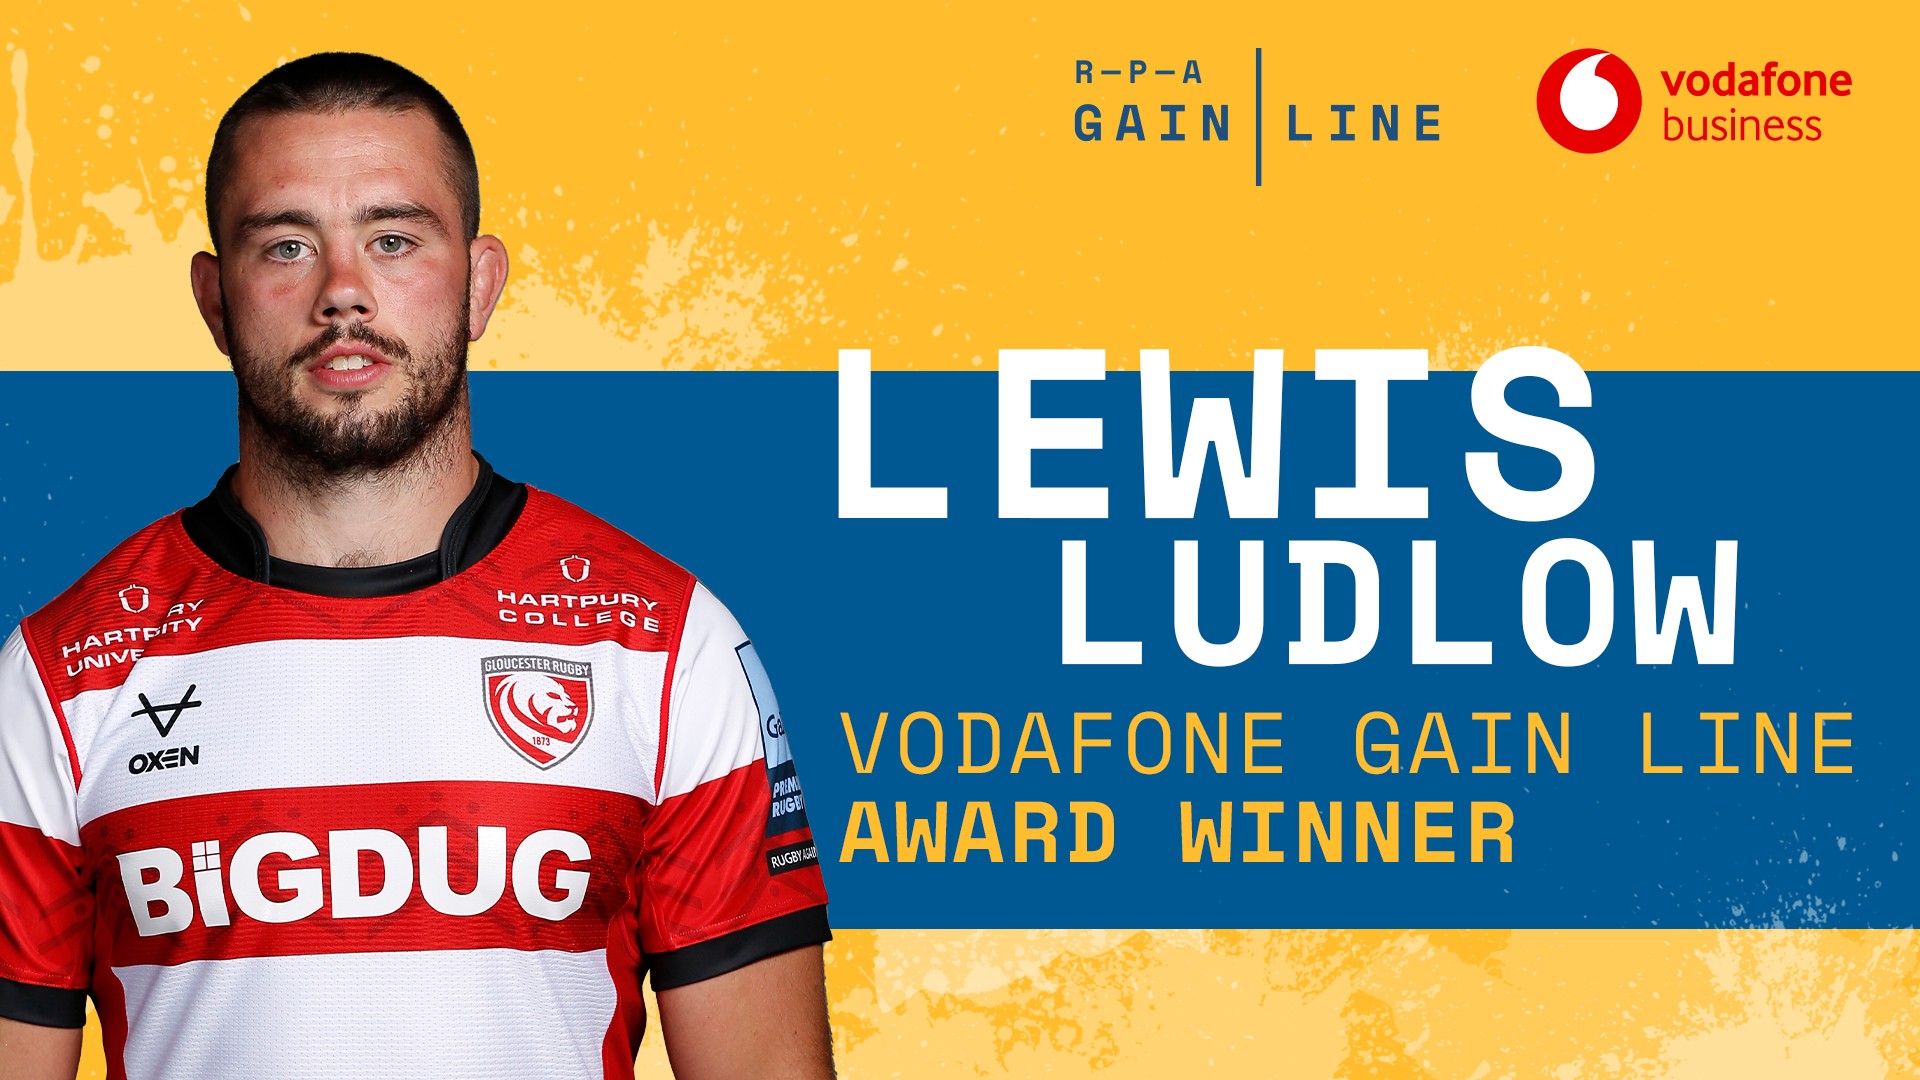 Gloucester Rugbys Lewis Ludlow wins second Vodafone Business Gain Line Award for 2021/22 Season The RPA